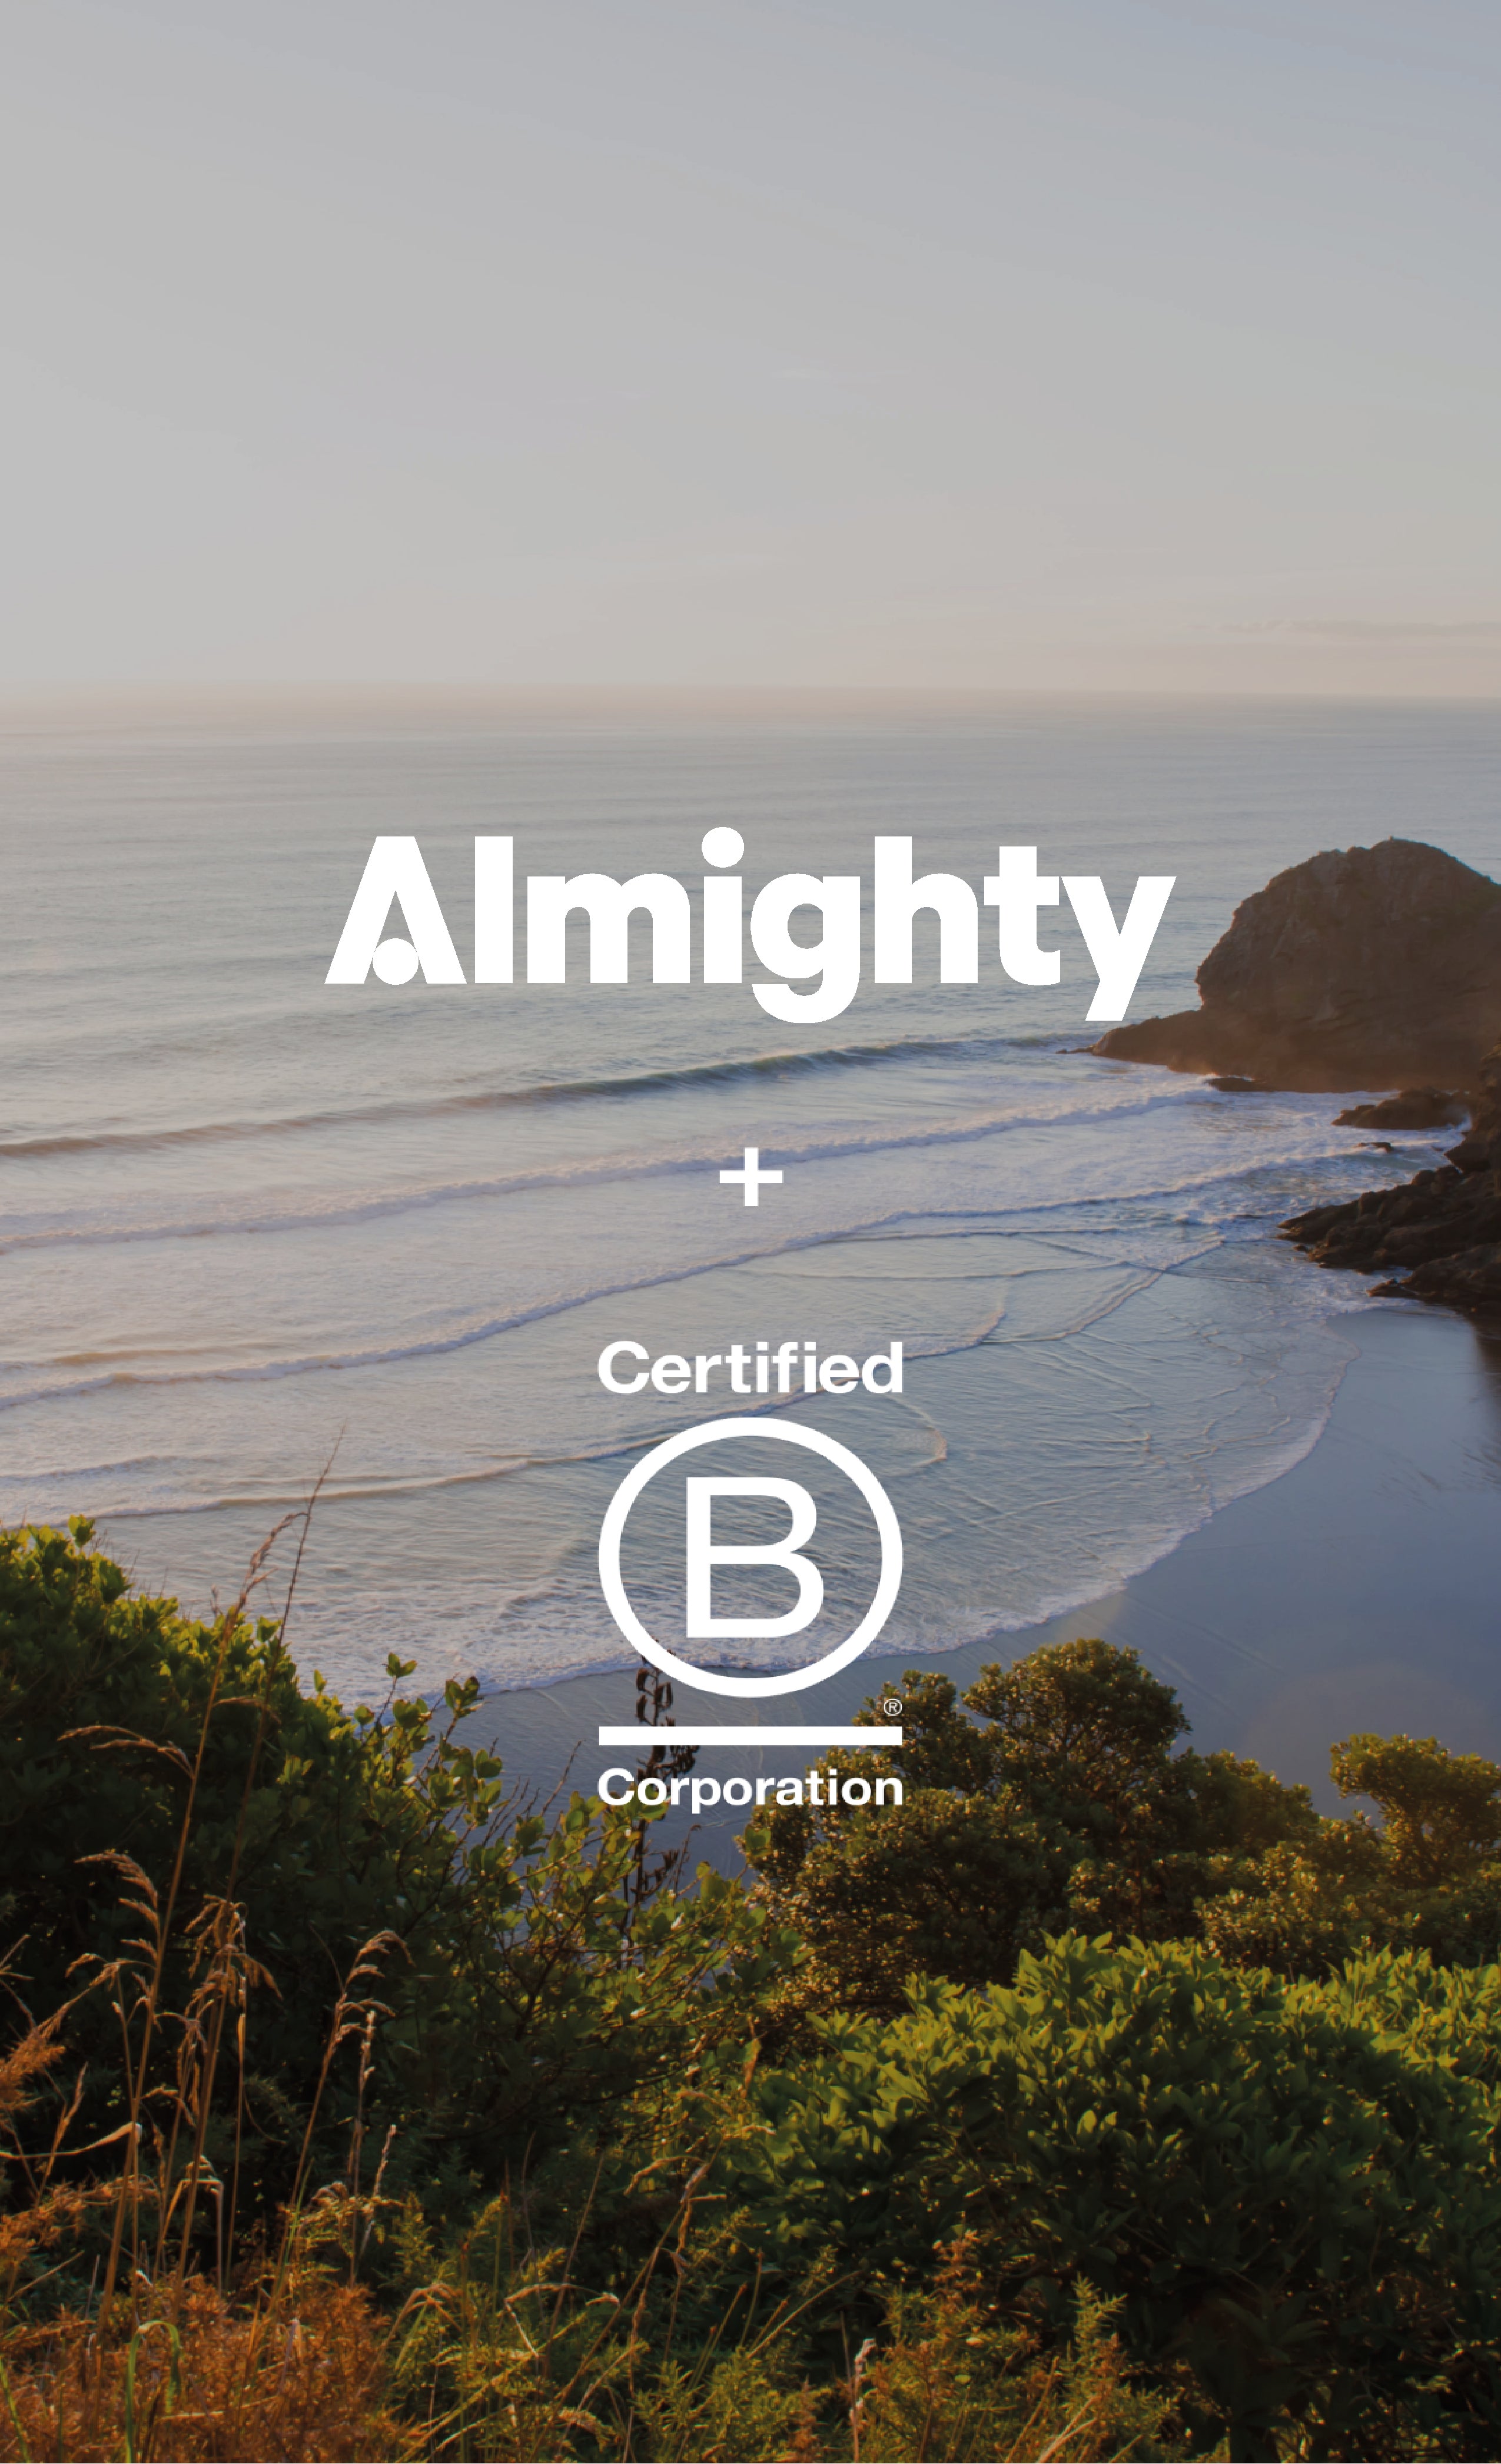 Almighty is now a B Corporation